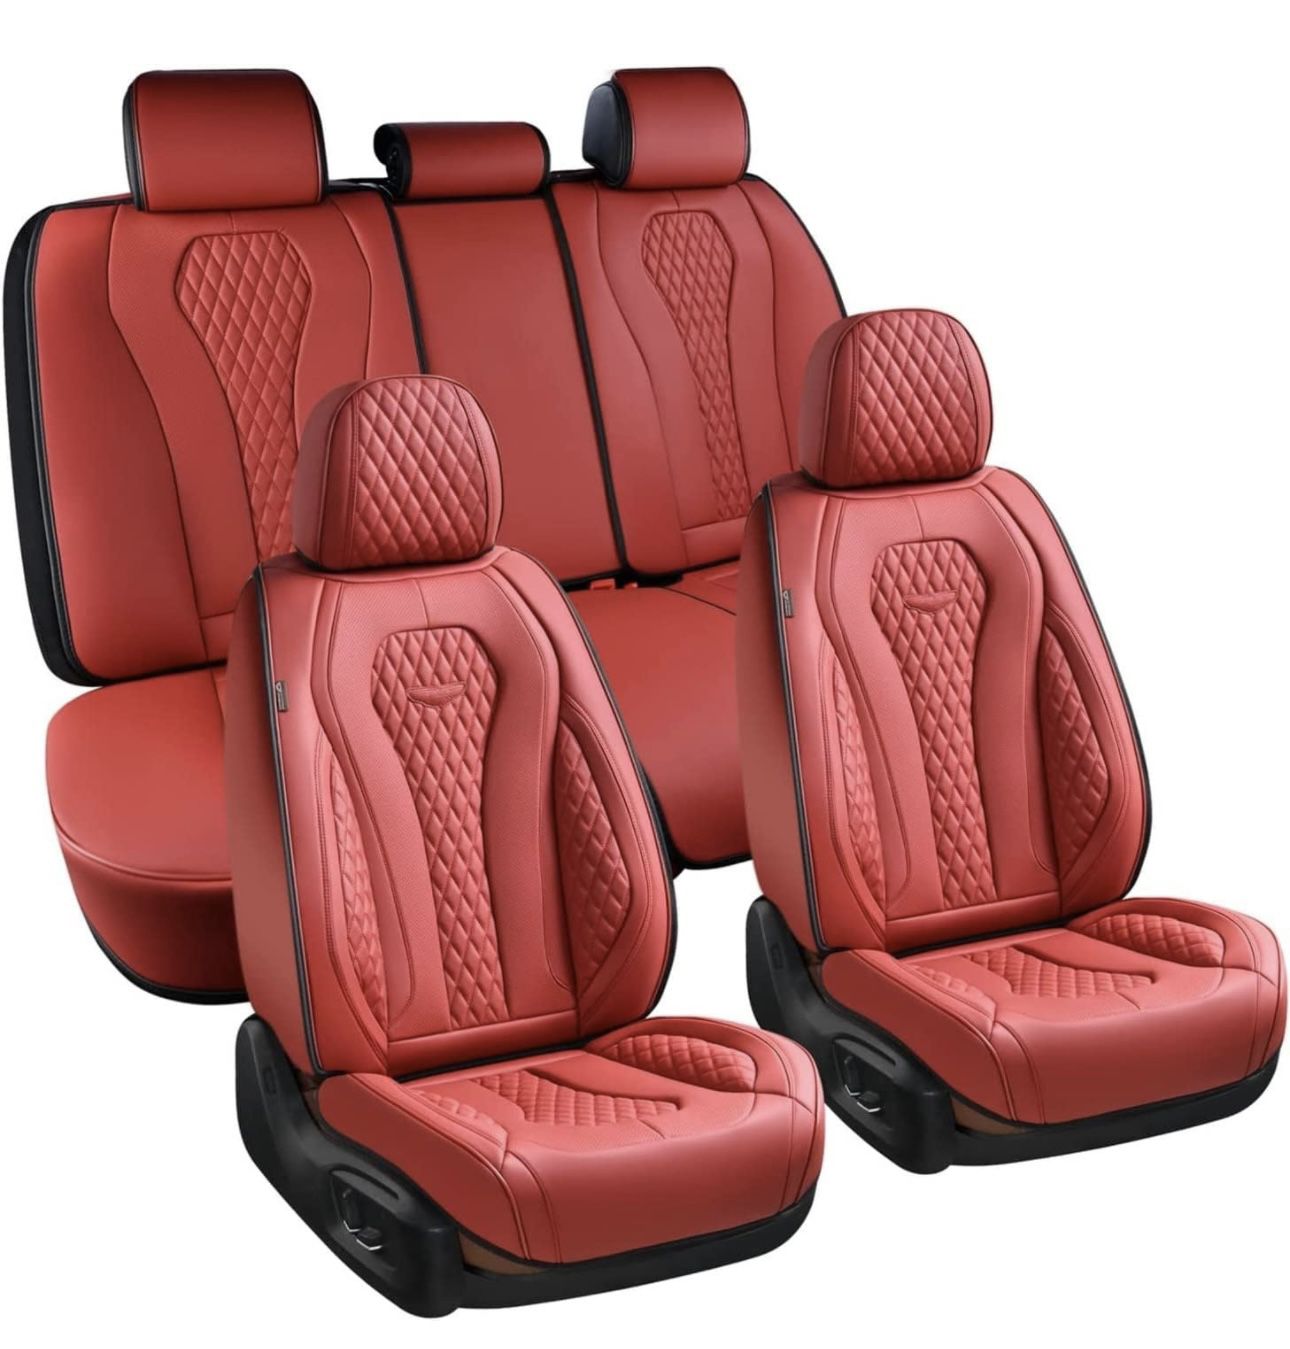 (SEALED BRAND NEW)Coverado FULL SET Seat Covers,Car Seat Covers , Red Car Seat Cover, Car Seat Covers Front Seats Back Seat Cover, Waterproof LEATHER.